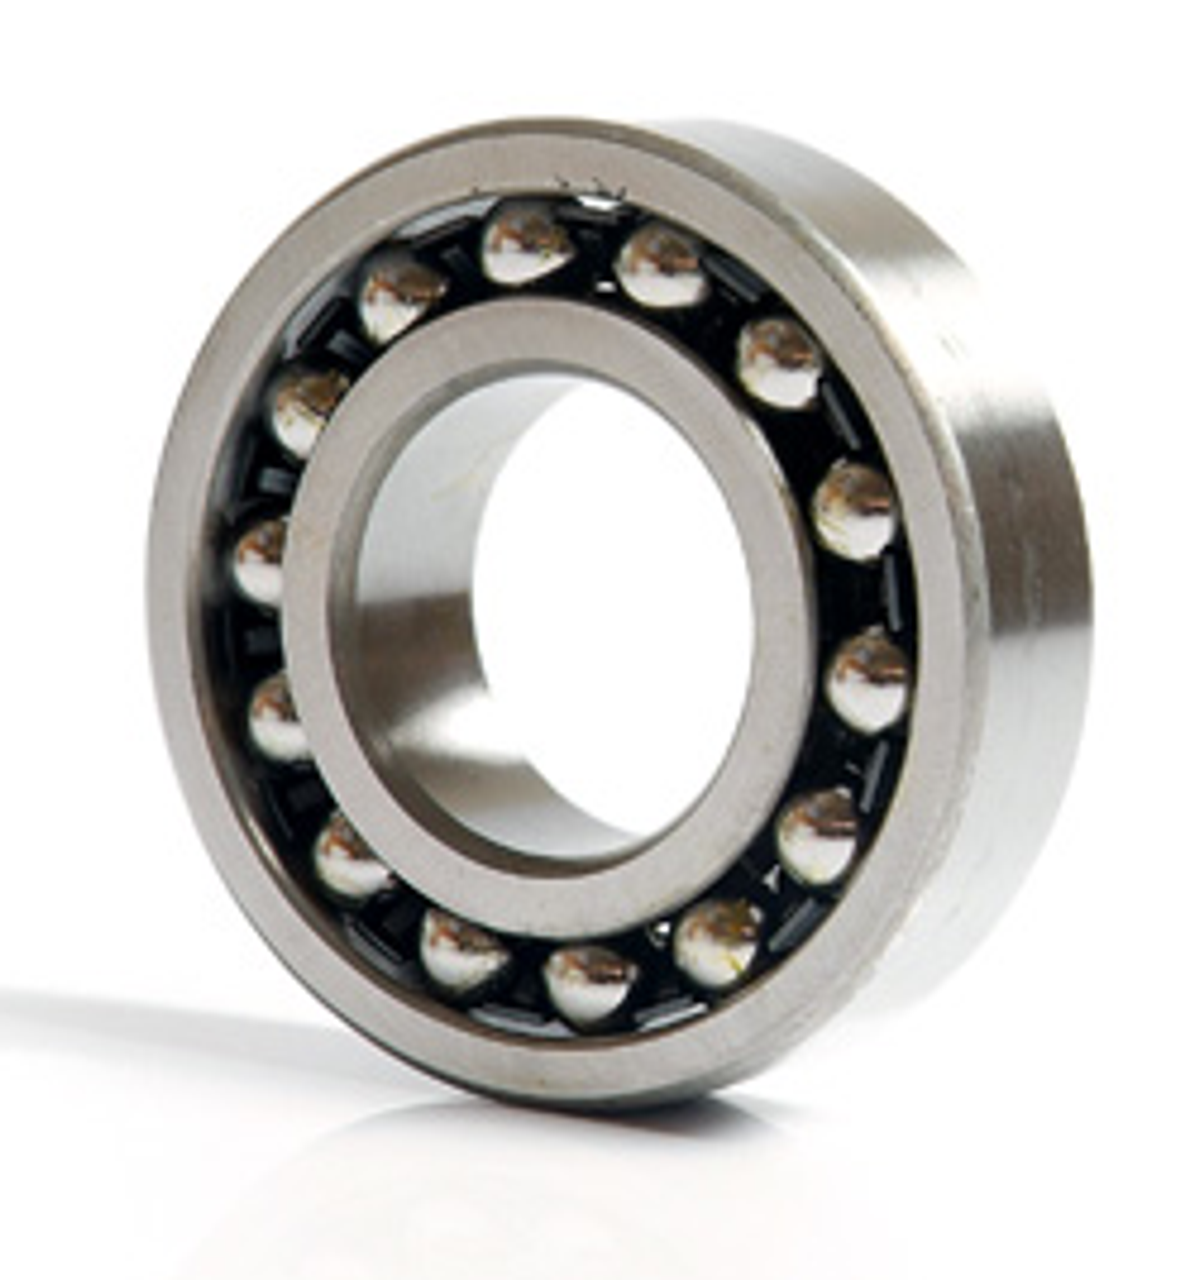 H 316 Adapter Sleeve Manufacturers, Suppliers, Distributor - Good Price -  Lasting Bearing Group